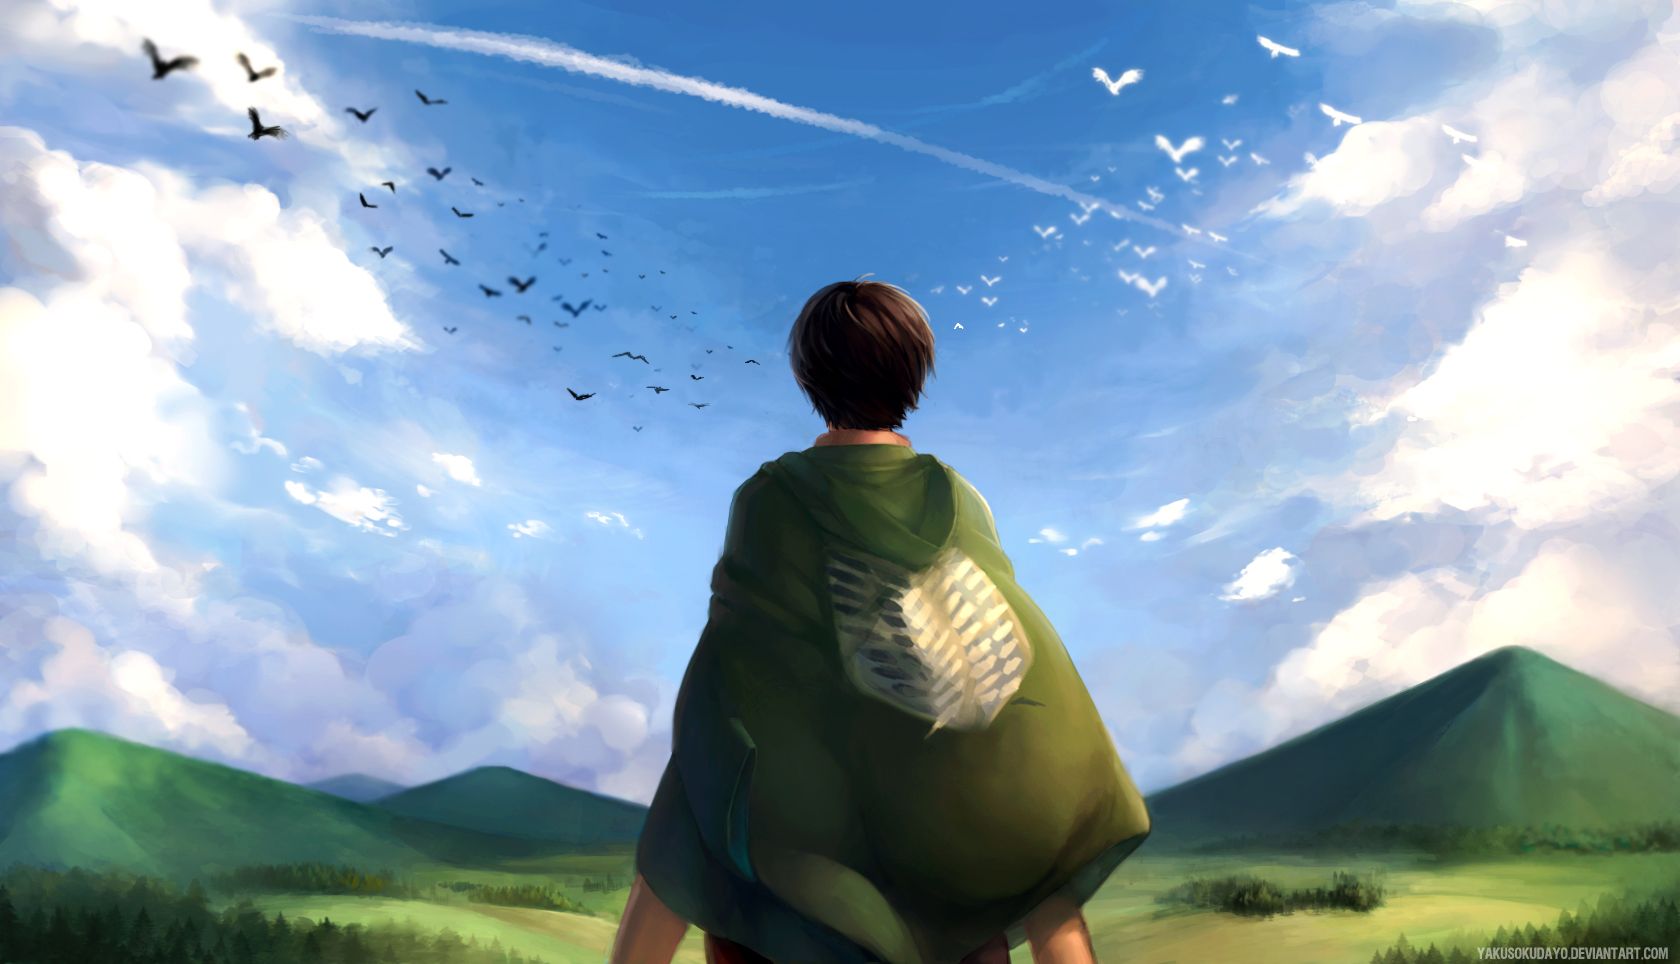 Feel the freedom! Computer Wallpaper, Desktop Backgroundx964. Attack on titan, Anime quotes, Attack on titan anime